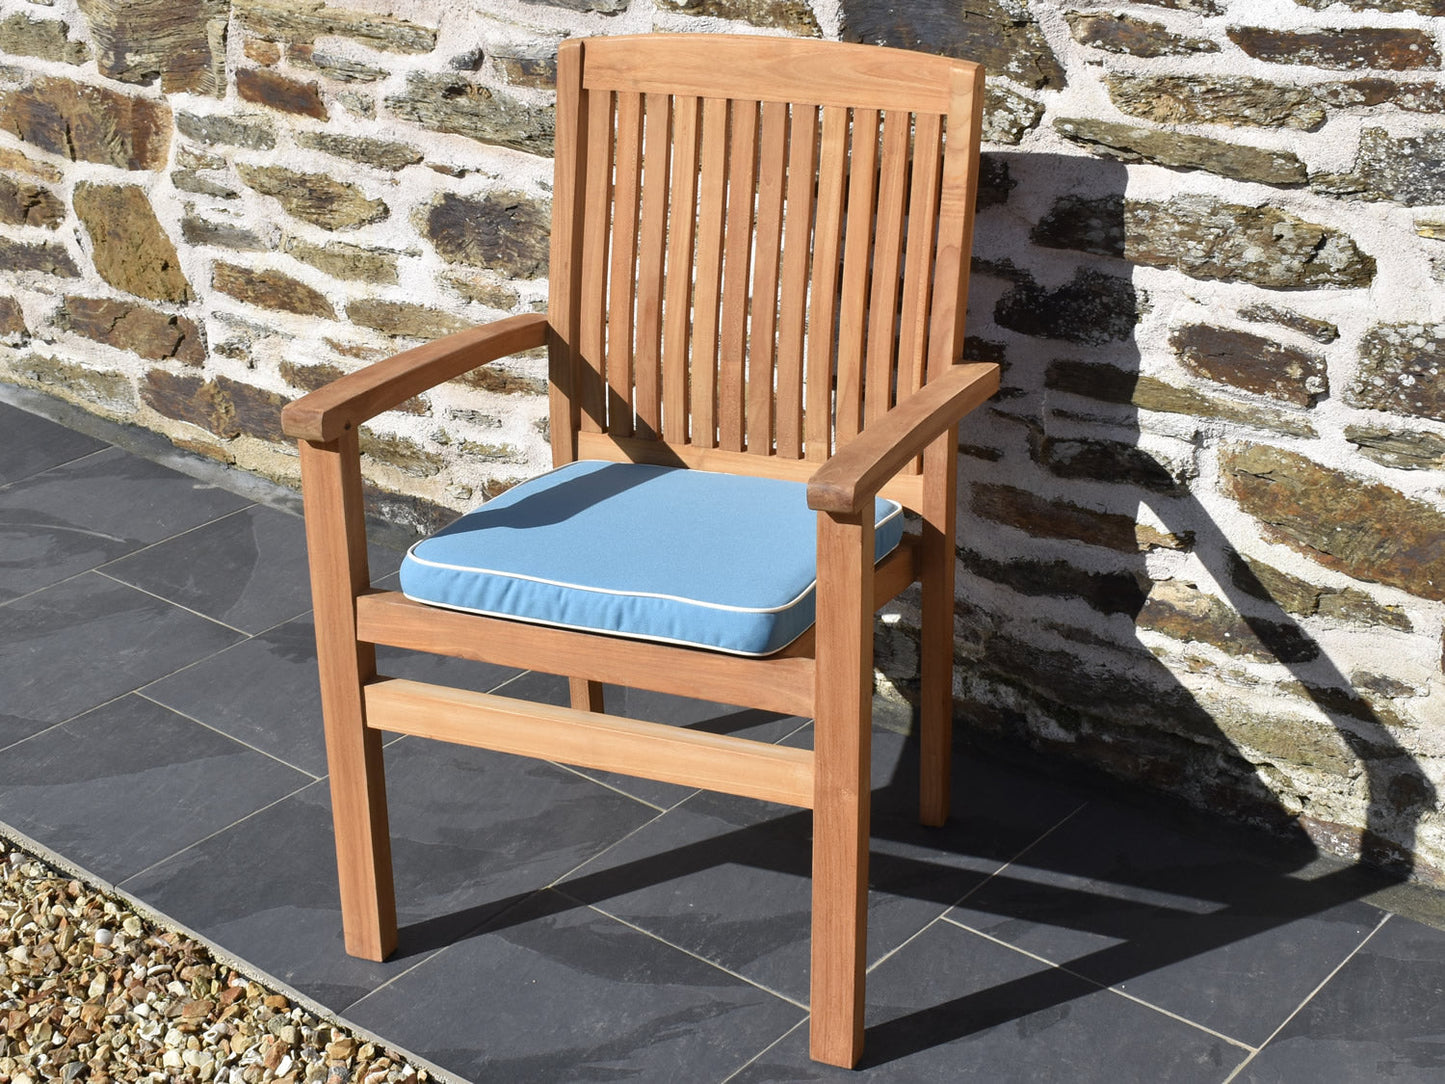 Luxury large outdoor garden seat pad, Light Blue with White piping